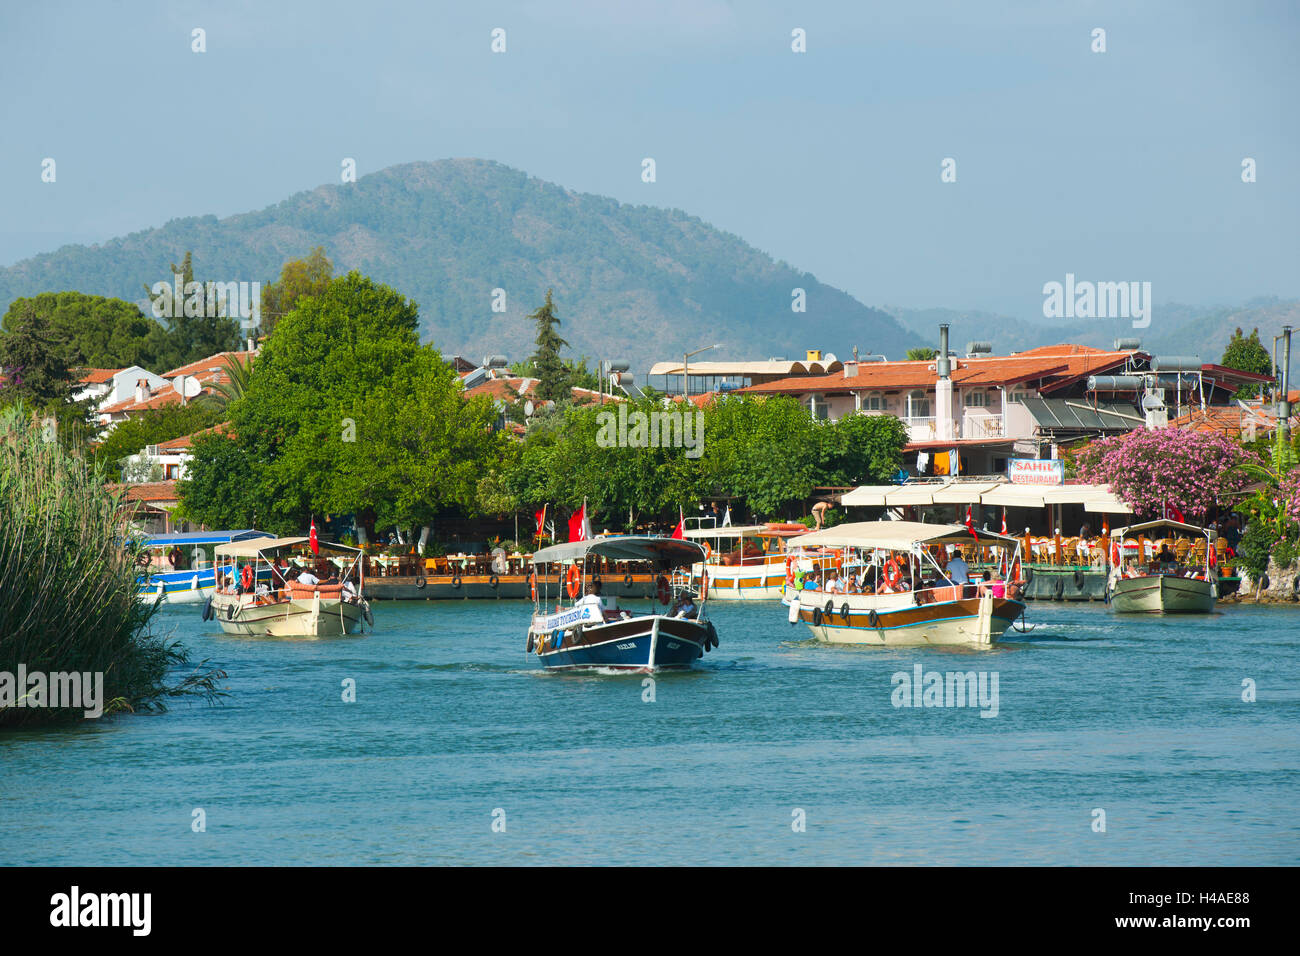 Turkey, province of Mugla, Dalyan, excursion boats in the channel, Stock Photo